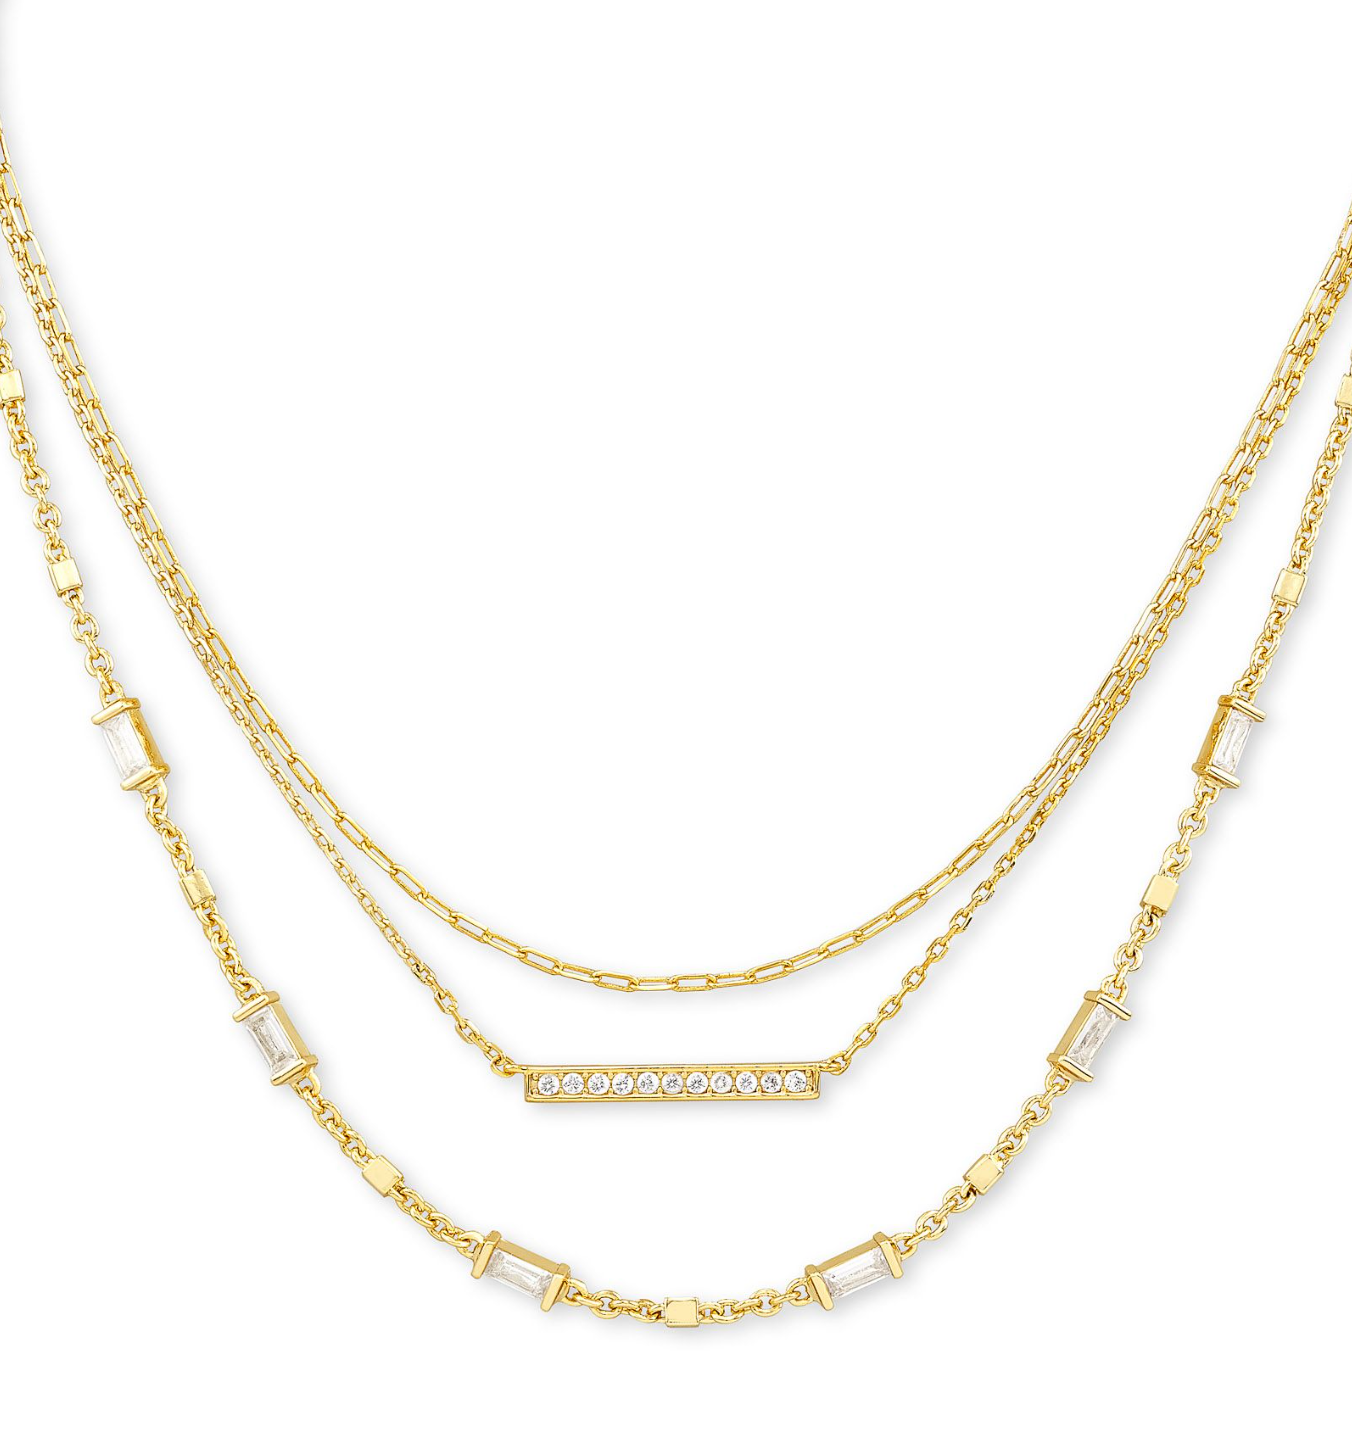 KENDRA SCOTT Addison Tripple Strand Necklace in Gold - The Street Boutique 